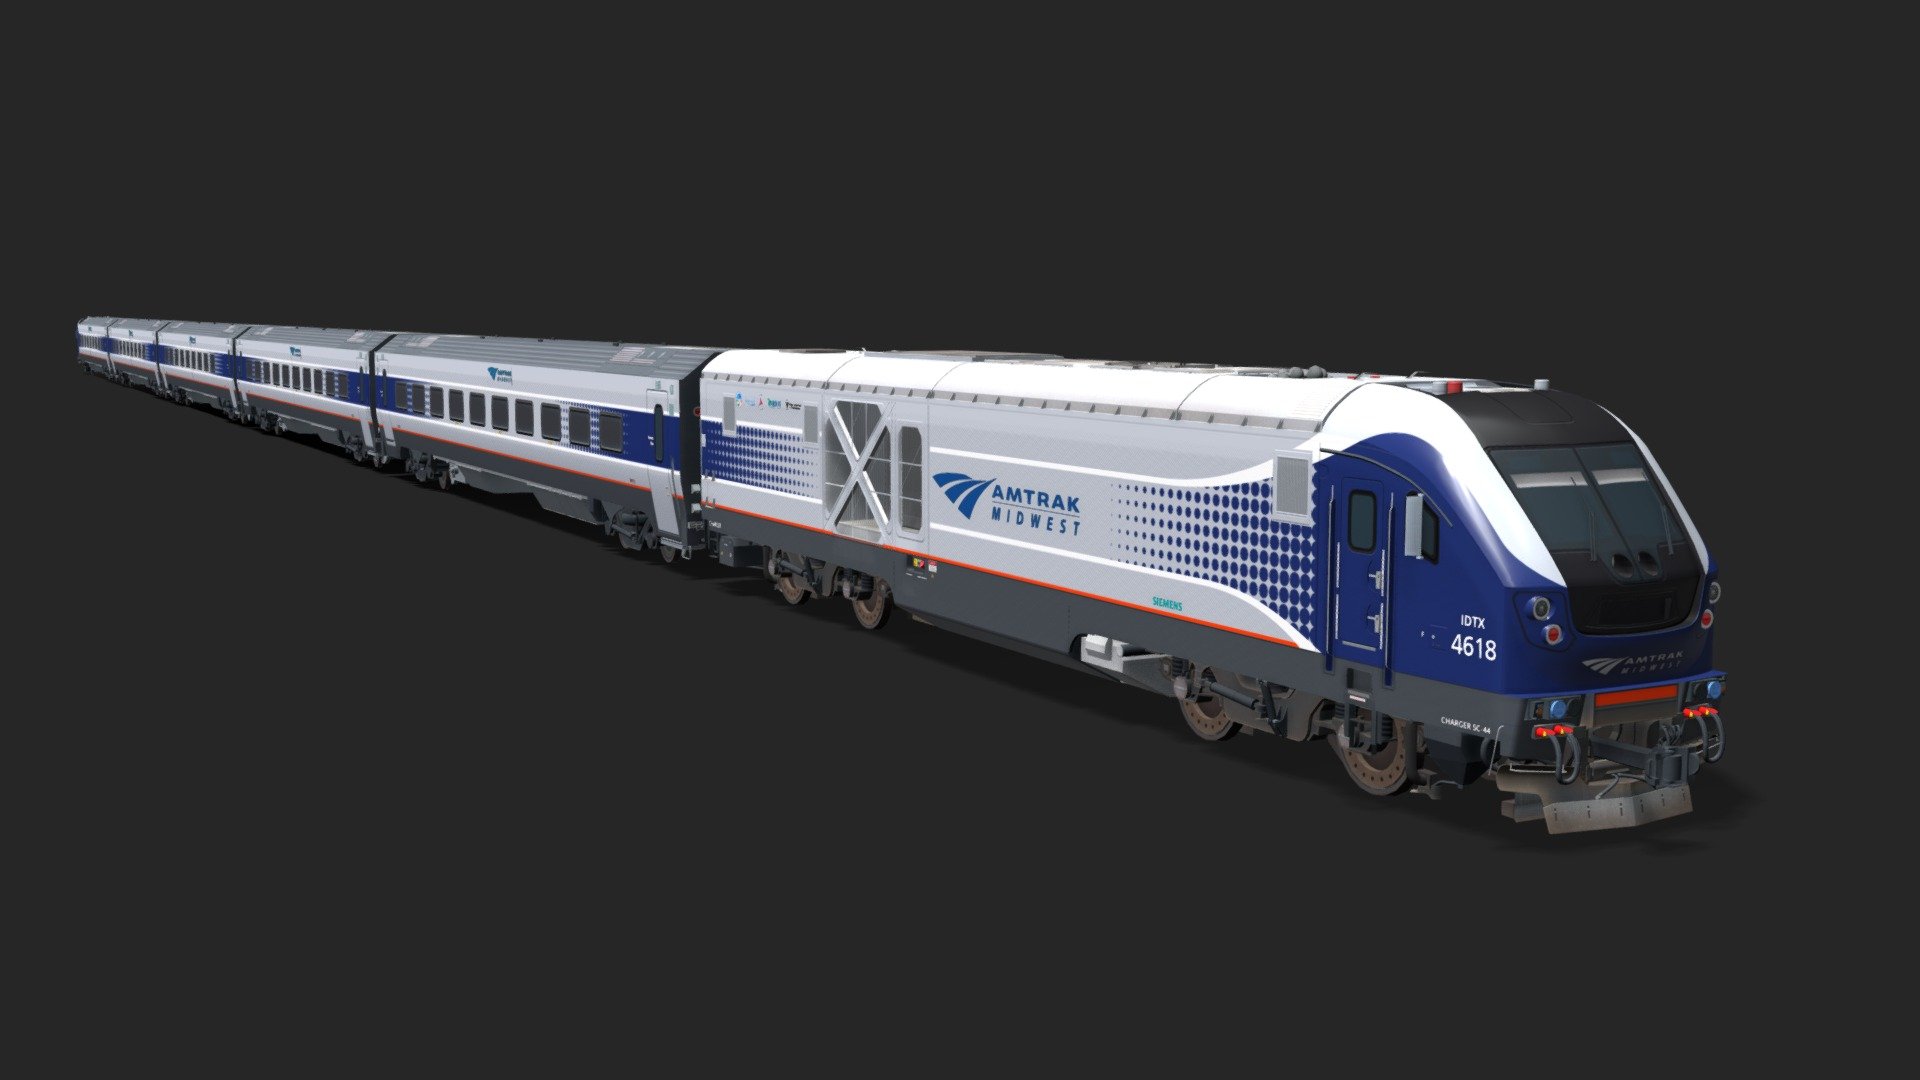 Consist pack of Siemens Charger locomotive and Venture coaches, that are part of Amtrak’s rolling stock replacement project. This is the Midwest variant of that contains SC-44 based driving trailer, Venture coaches and SC-44 Charger diesel locomotive. They are the replacement of Horizon and Amfleet II coaches that Amtrak is currently using. 

The pack contains pre-set configuration; Siemens Charger engine, Coach, Business, Cafe cars of Venture coaches, as well as driving trailer. They can be customized as I also provided coaches separately. 

Models are made for video game Cities: Skylines as functional train assets. Pack contains standard textures; diffuse, alpha, specular, illumination and color. Roughness can be provided in case needed 3d model